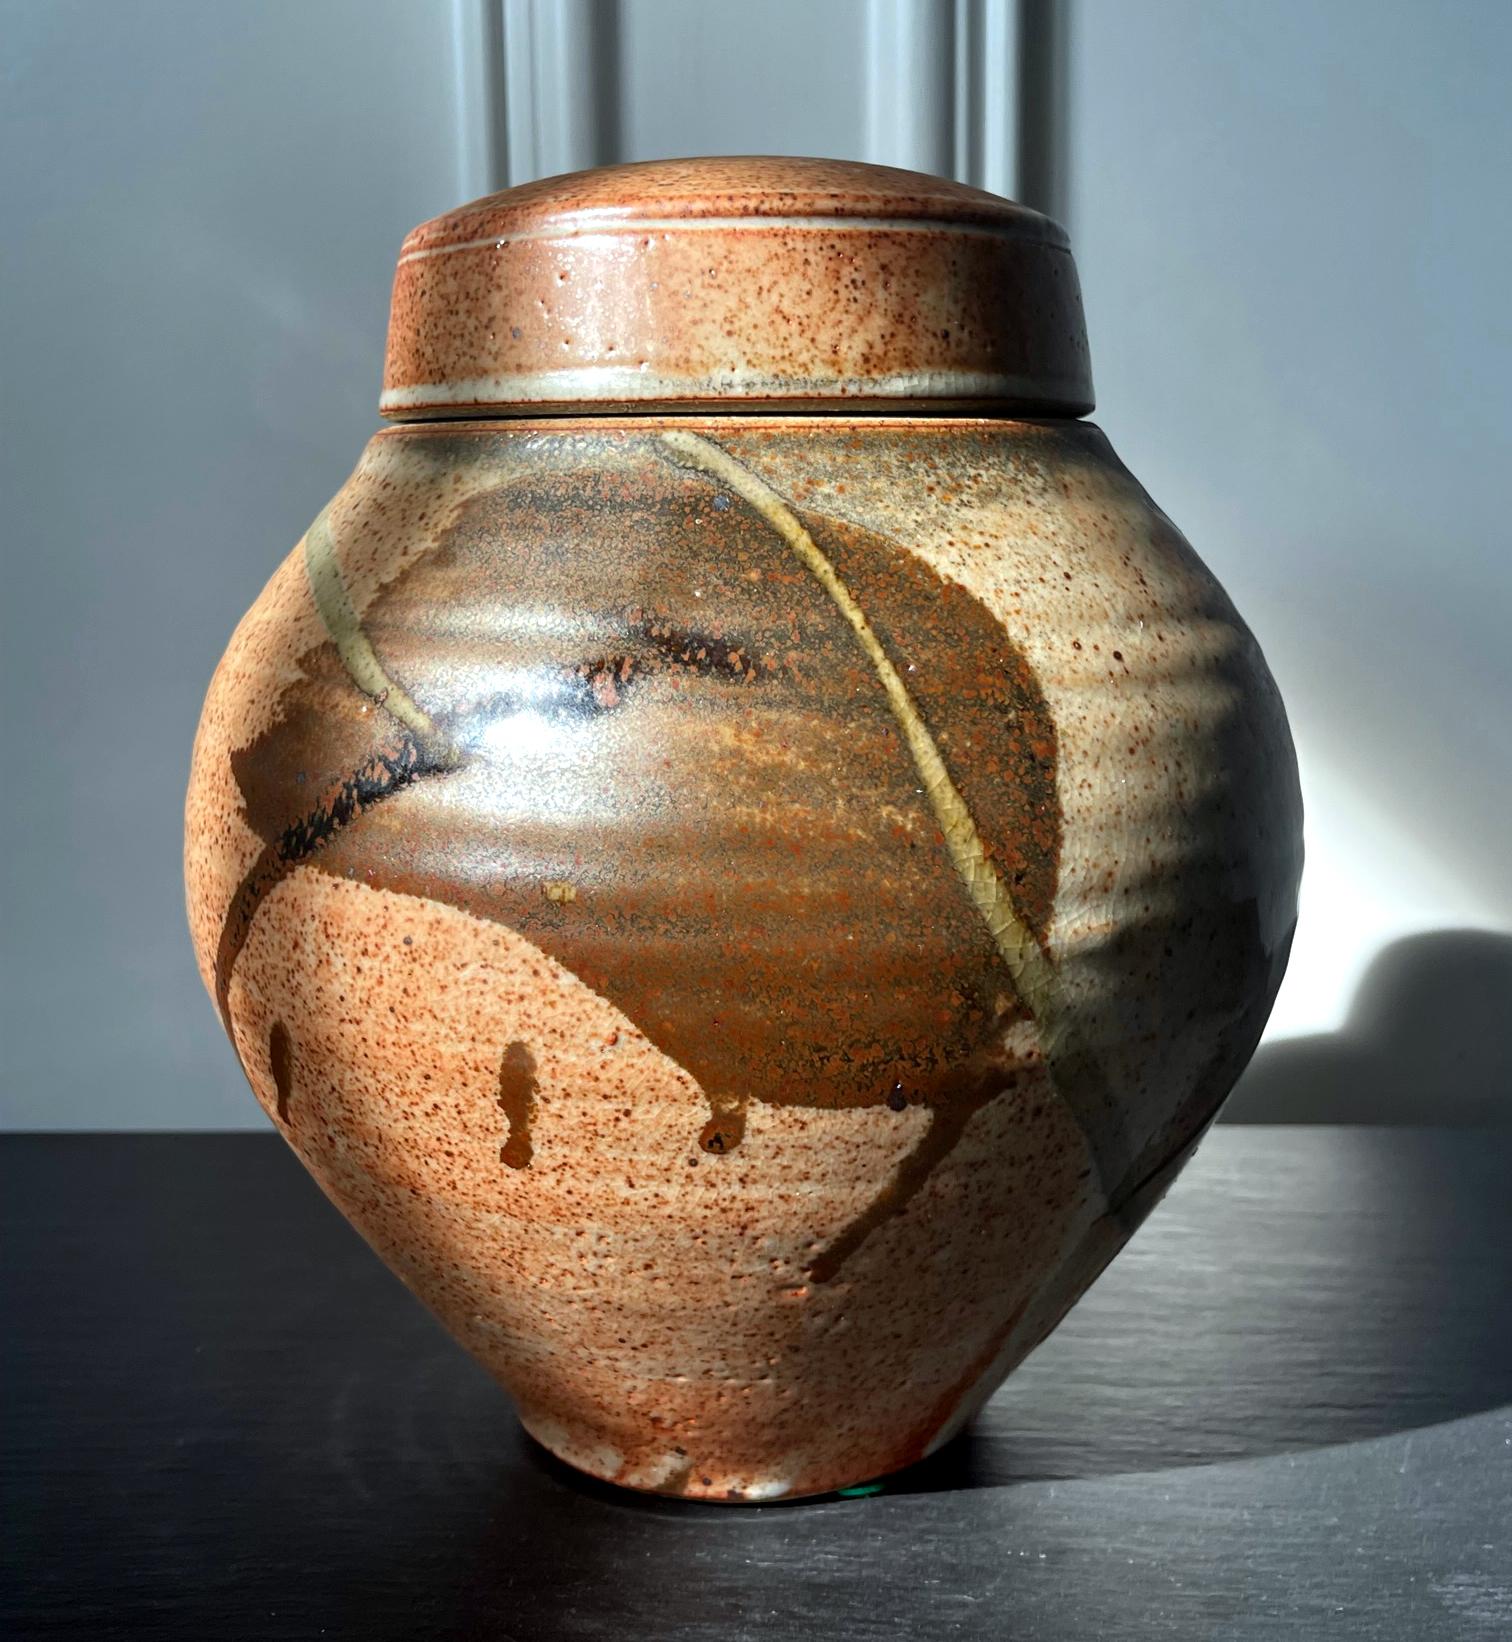 A ceramic (earth ware) lidded jar with glazed surface by American studio potter Karen Karnes (1925-2016). The mark on the jar indicates that the piece was made circa 2000s. The wheel-thrown piece shows off a beautiful form with a swell body and